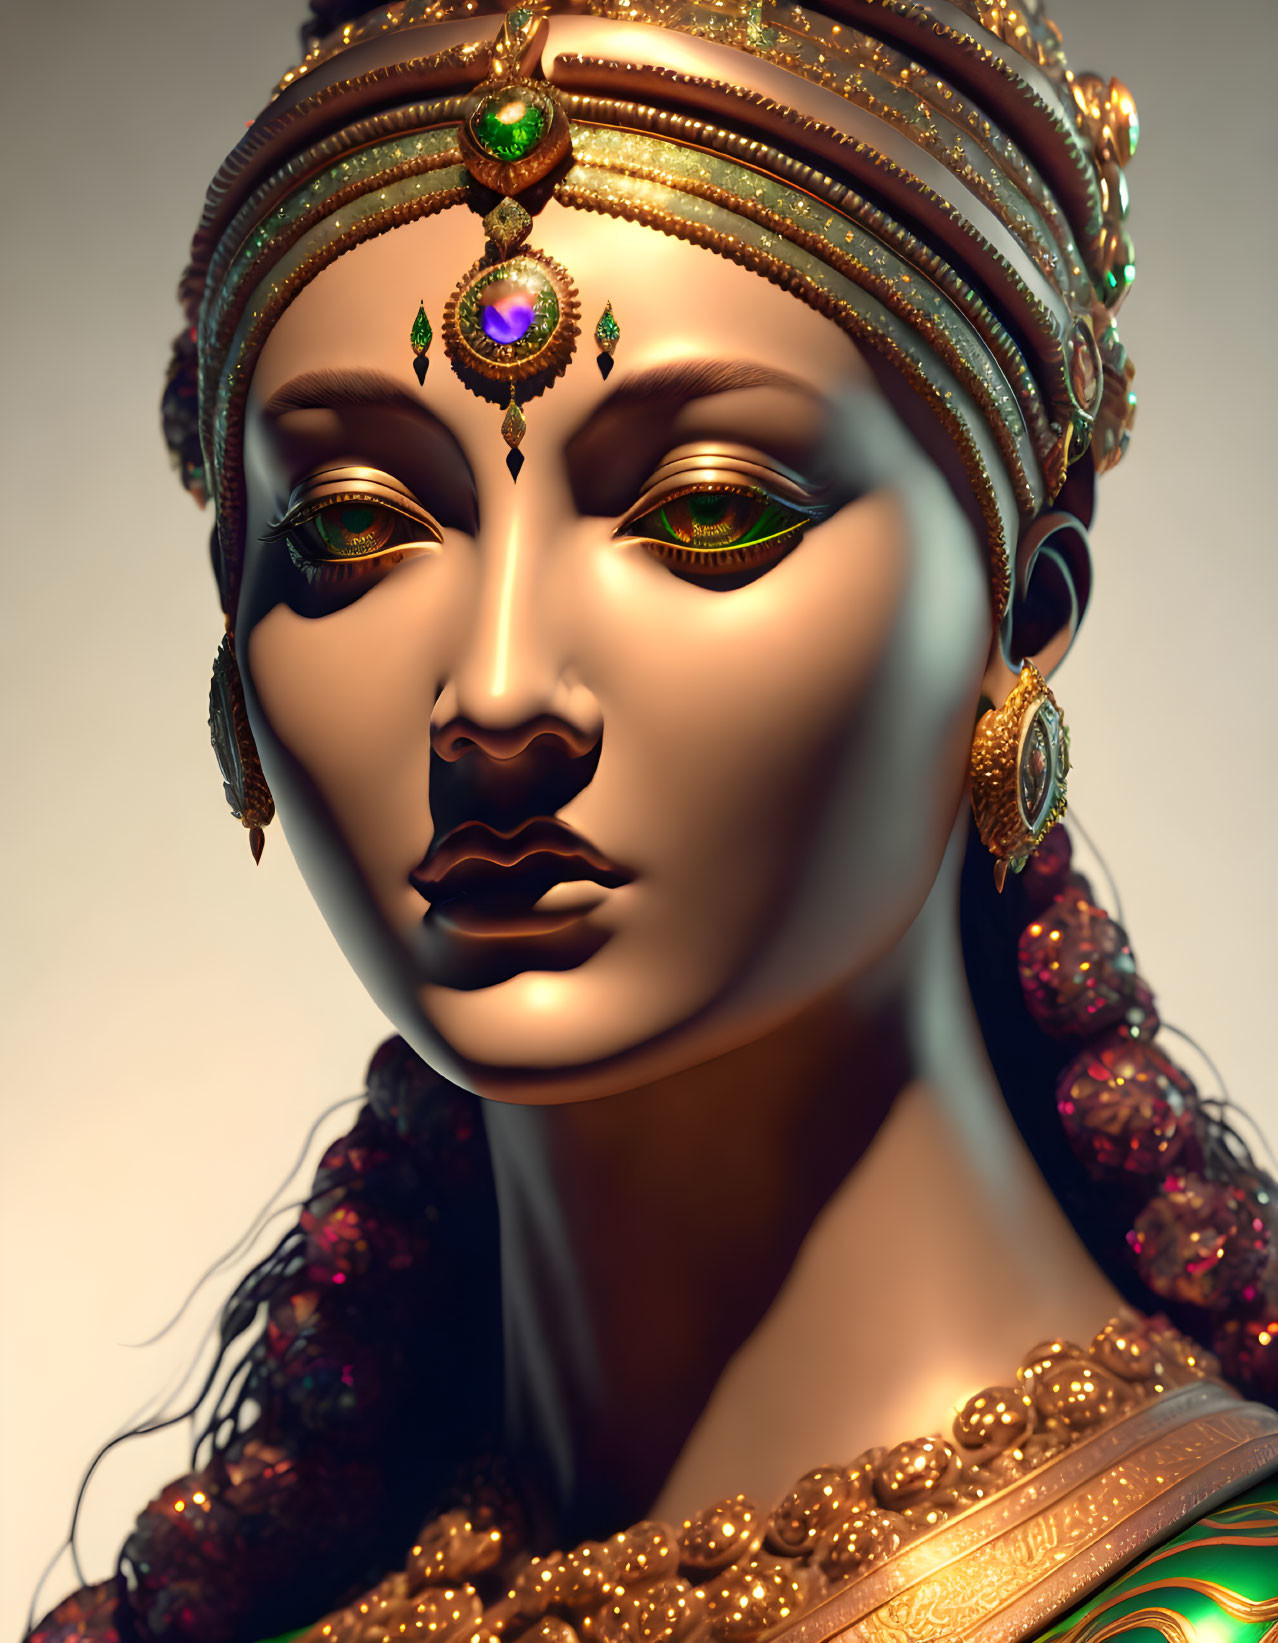 Digital artwork features woman with golden skin and intricate gold jewelry.